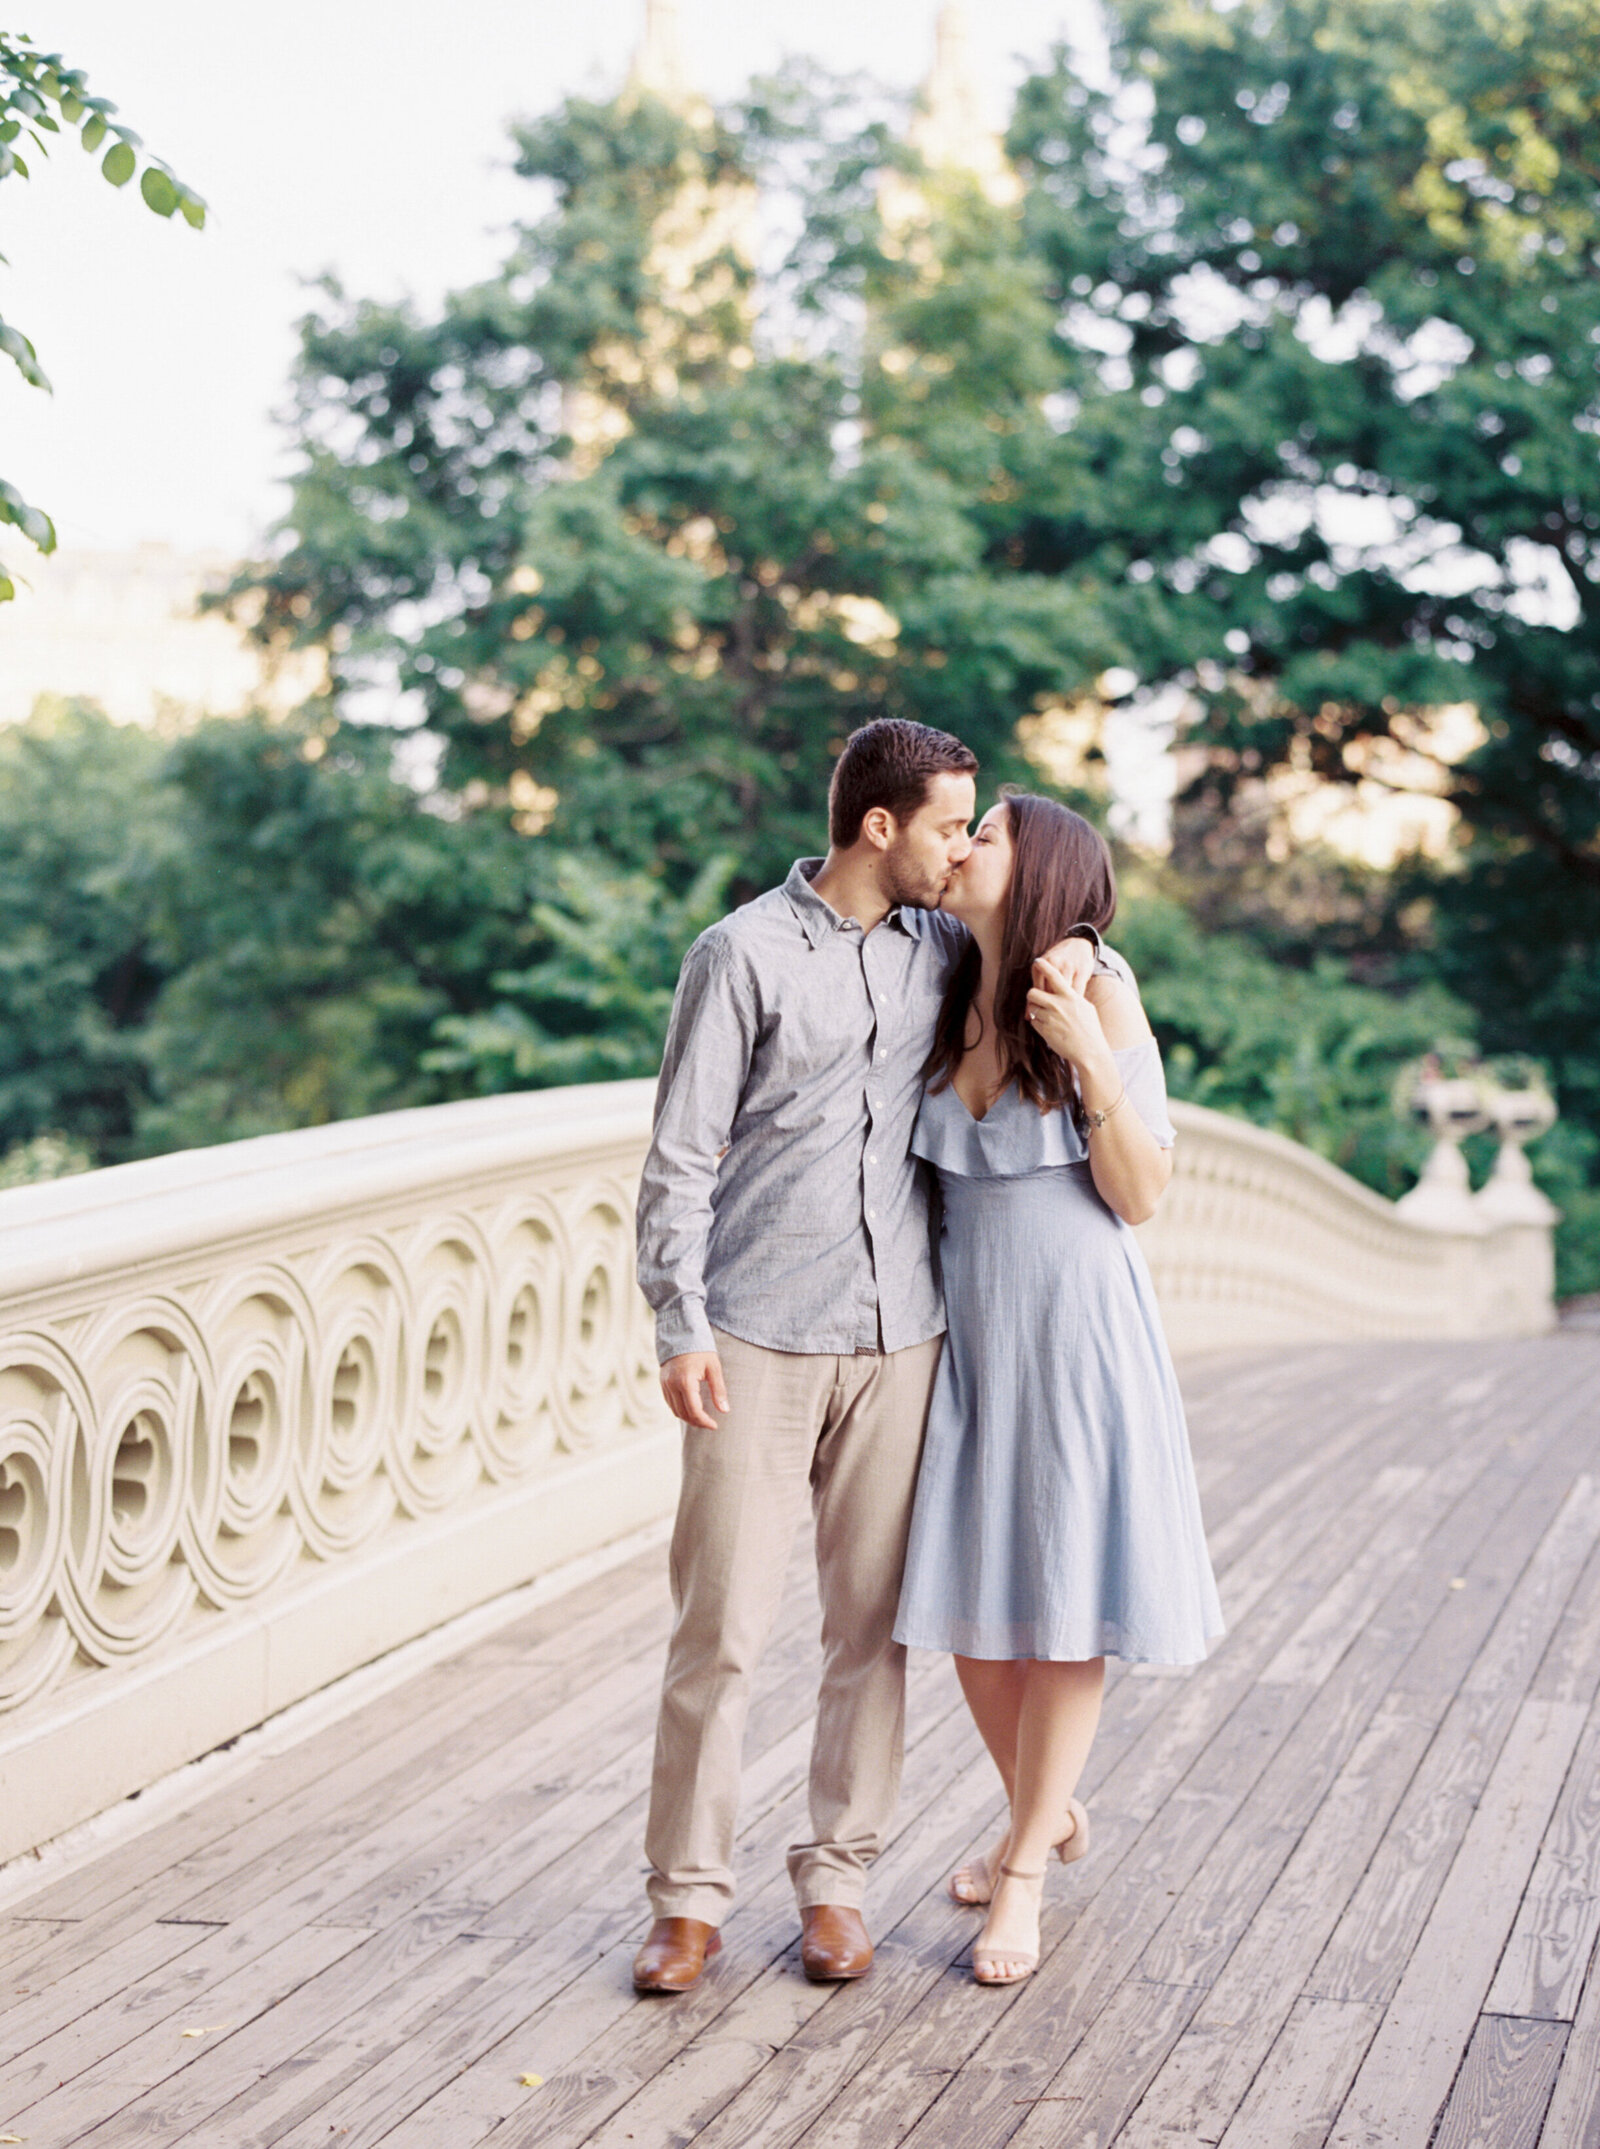 Kaylea Moreno_engagement gallery - Mike-Leia-engagement-session-56